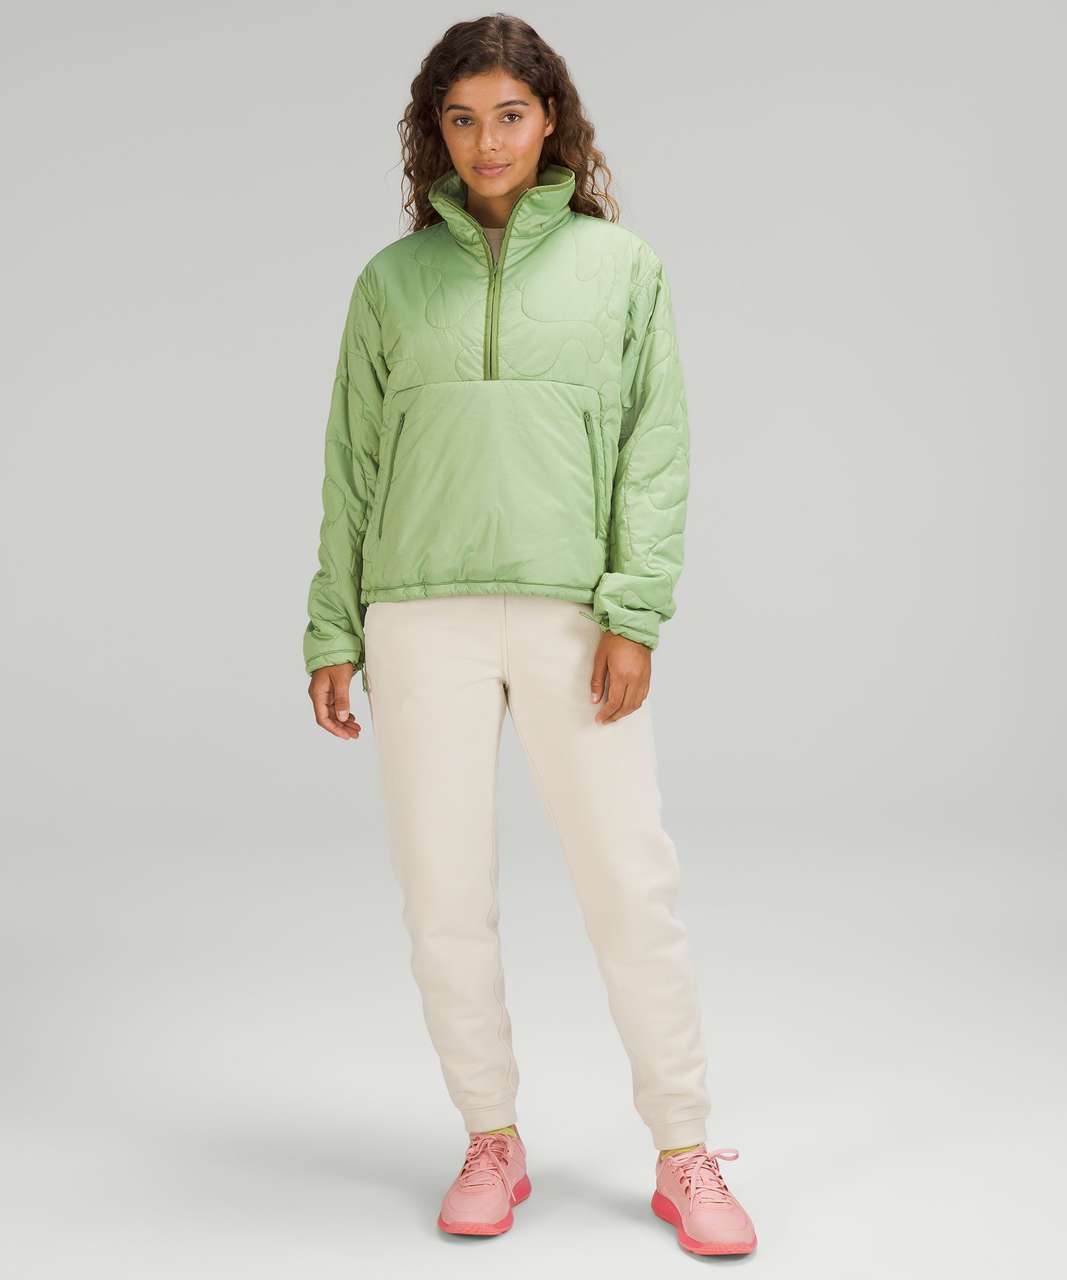 Lululemon Insulated Quilted Pullover Jacket - Heathered Green Foliage